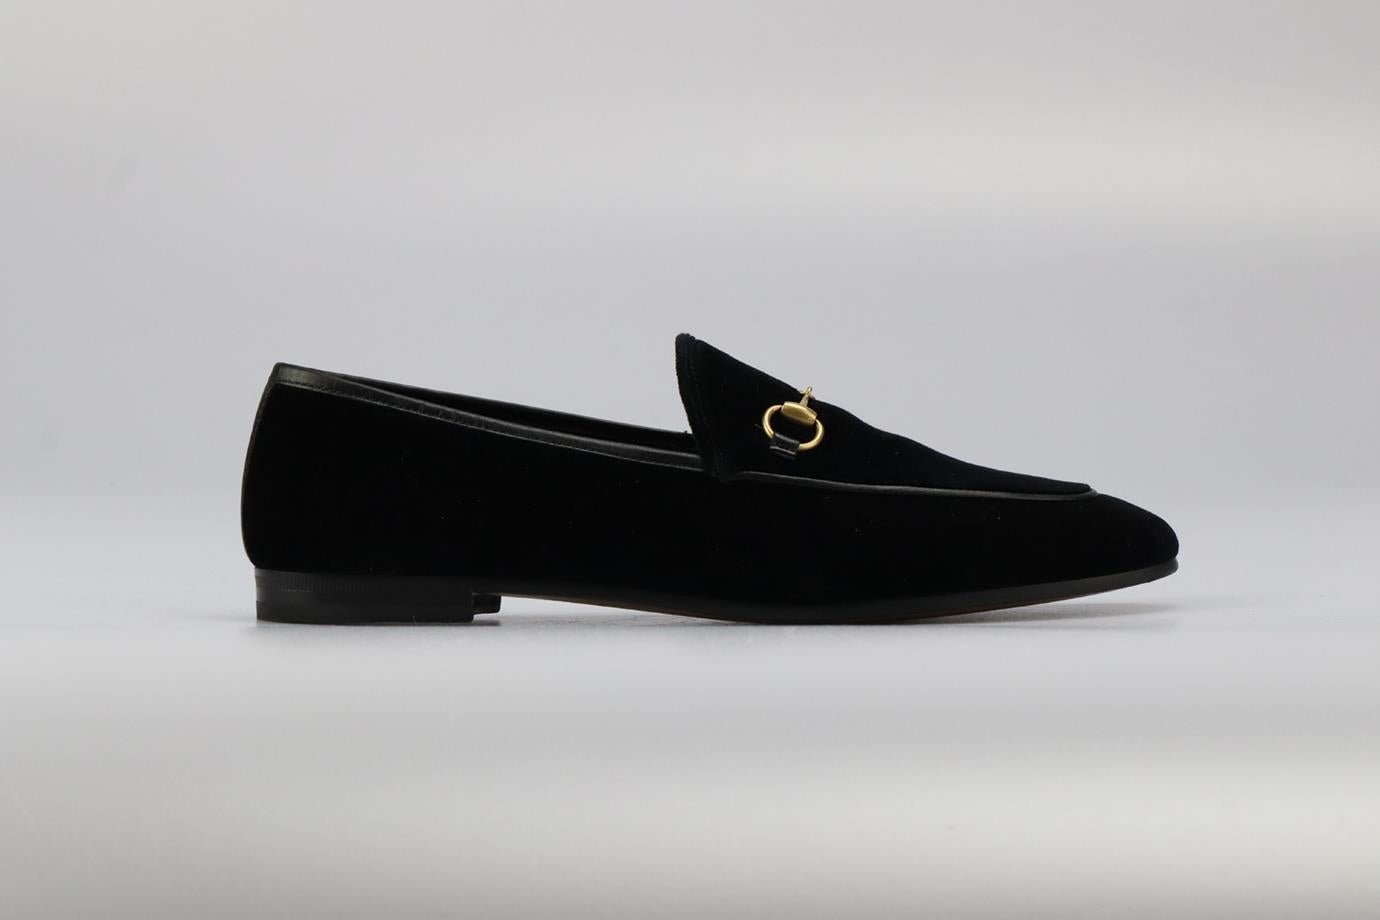 Gucci Jordaan Velvet And Leather Loafers. Black. Slips on. Does not come with - dustbag or box. EU 40.5 (UK 7.5, US 10.5). Insole: 10.6 in. Heel height: 0.5 in. Condition: Used. Very good condition - Some wear to soles. Light wear to upper material;